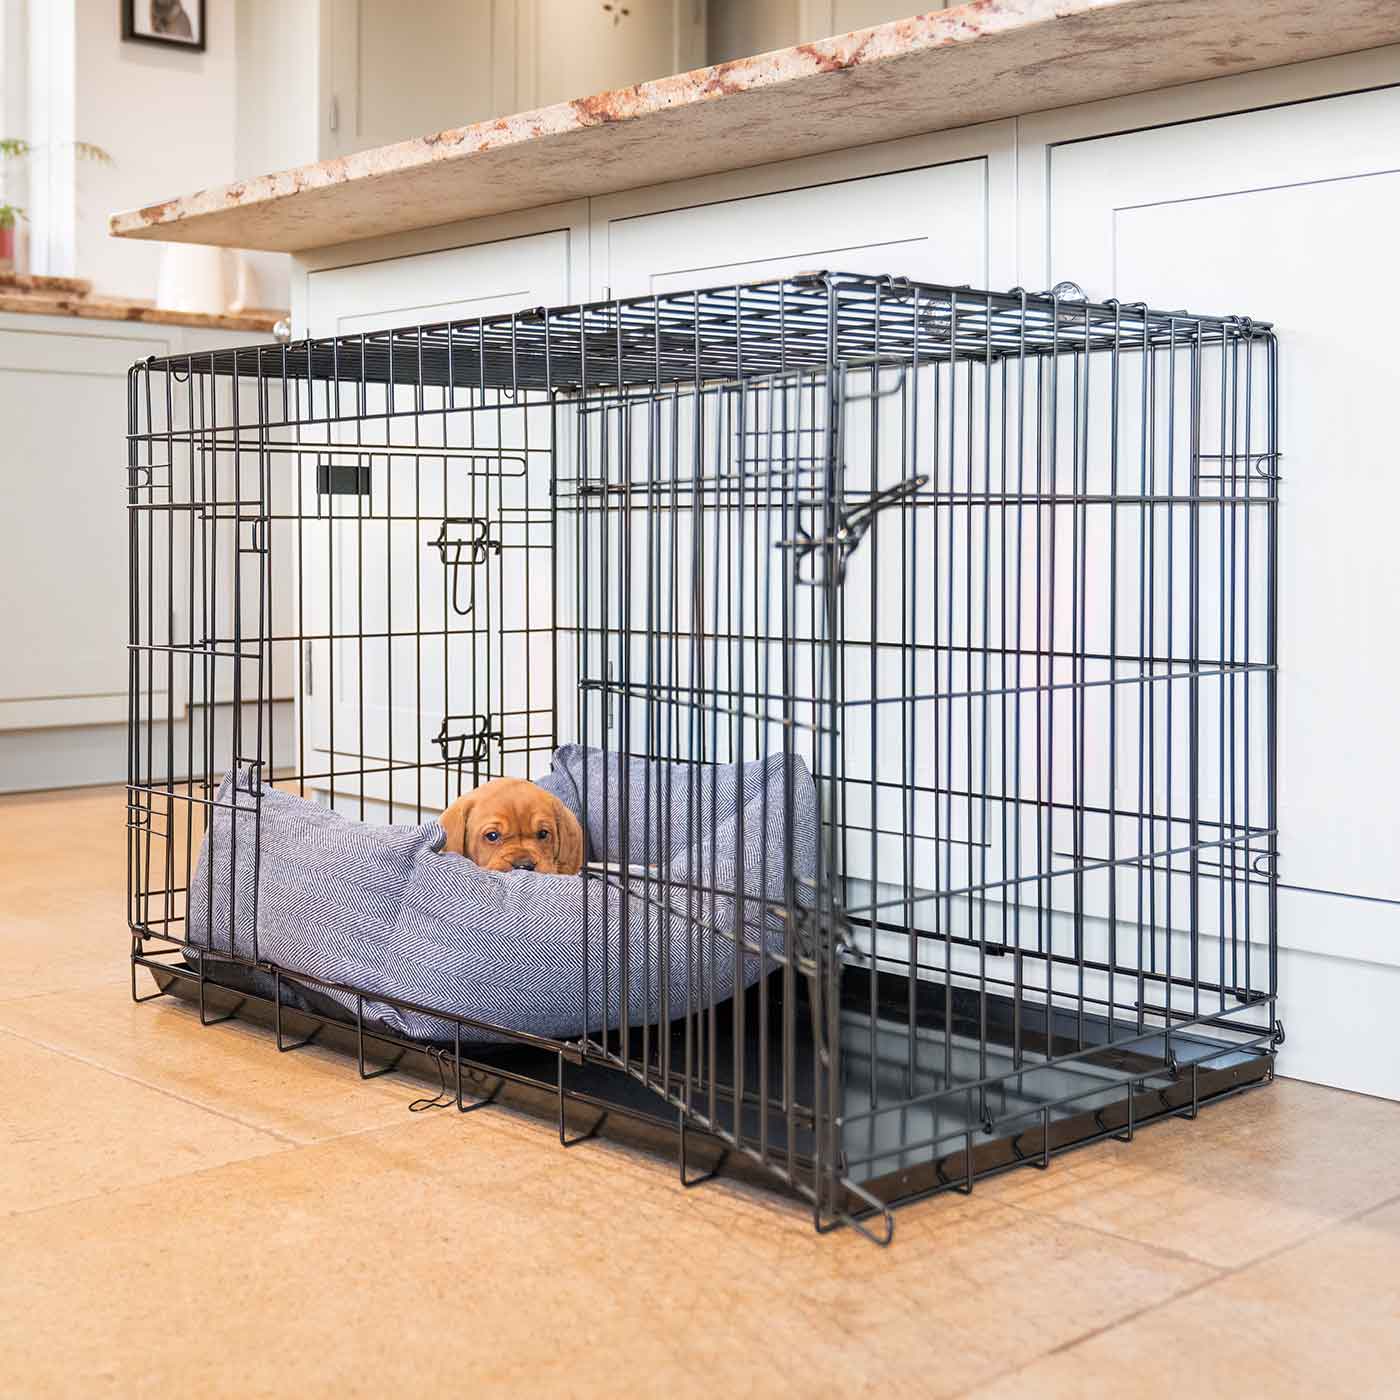 [color:oxford herringbone] Cozy & Calm Puppy Cage Bed, The Perfect Dog Cage Accessory For The Ultimate Dog Den! In Stunning Oxford Herringbone! Now Available to Personalize at Lords & Labradors US